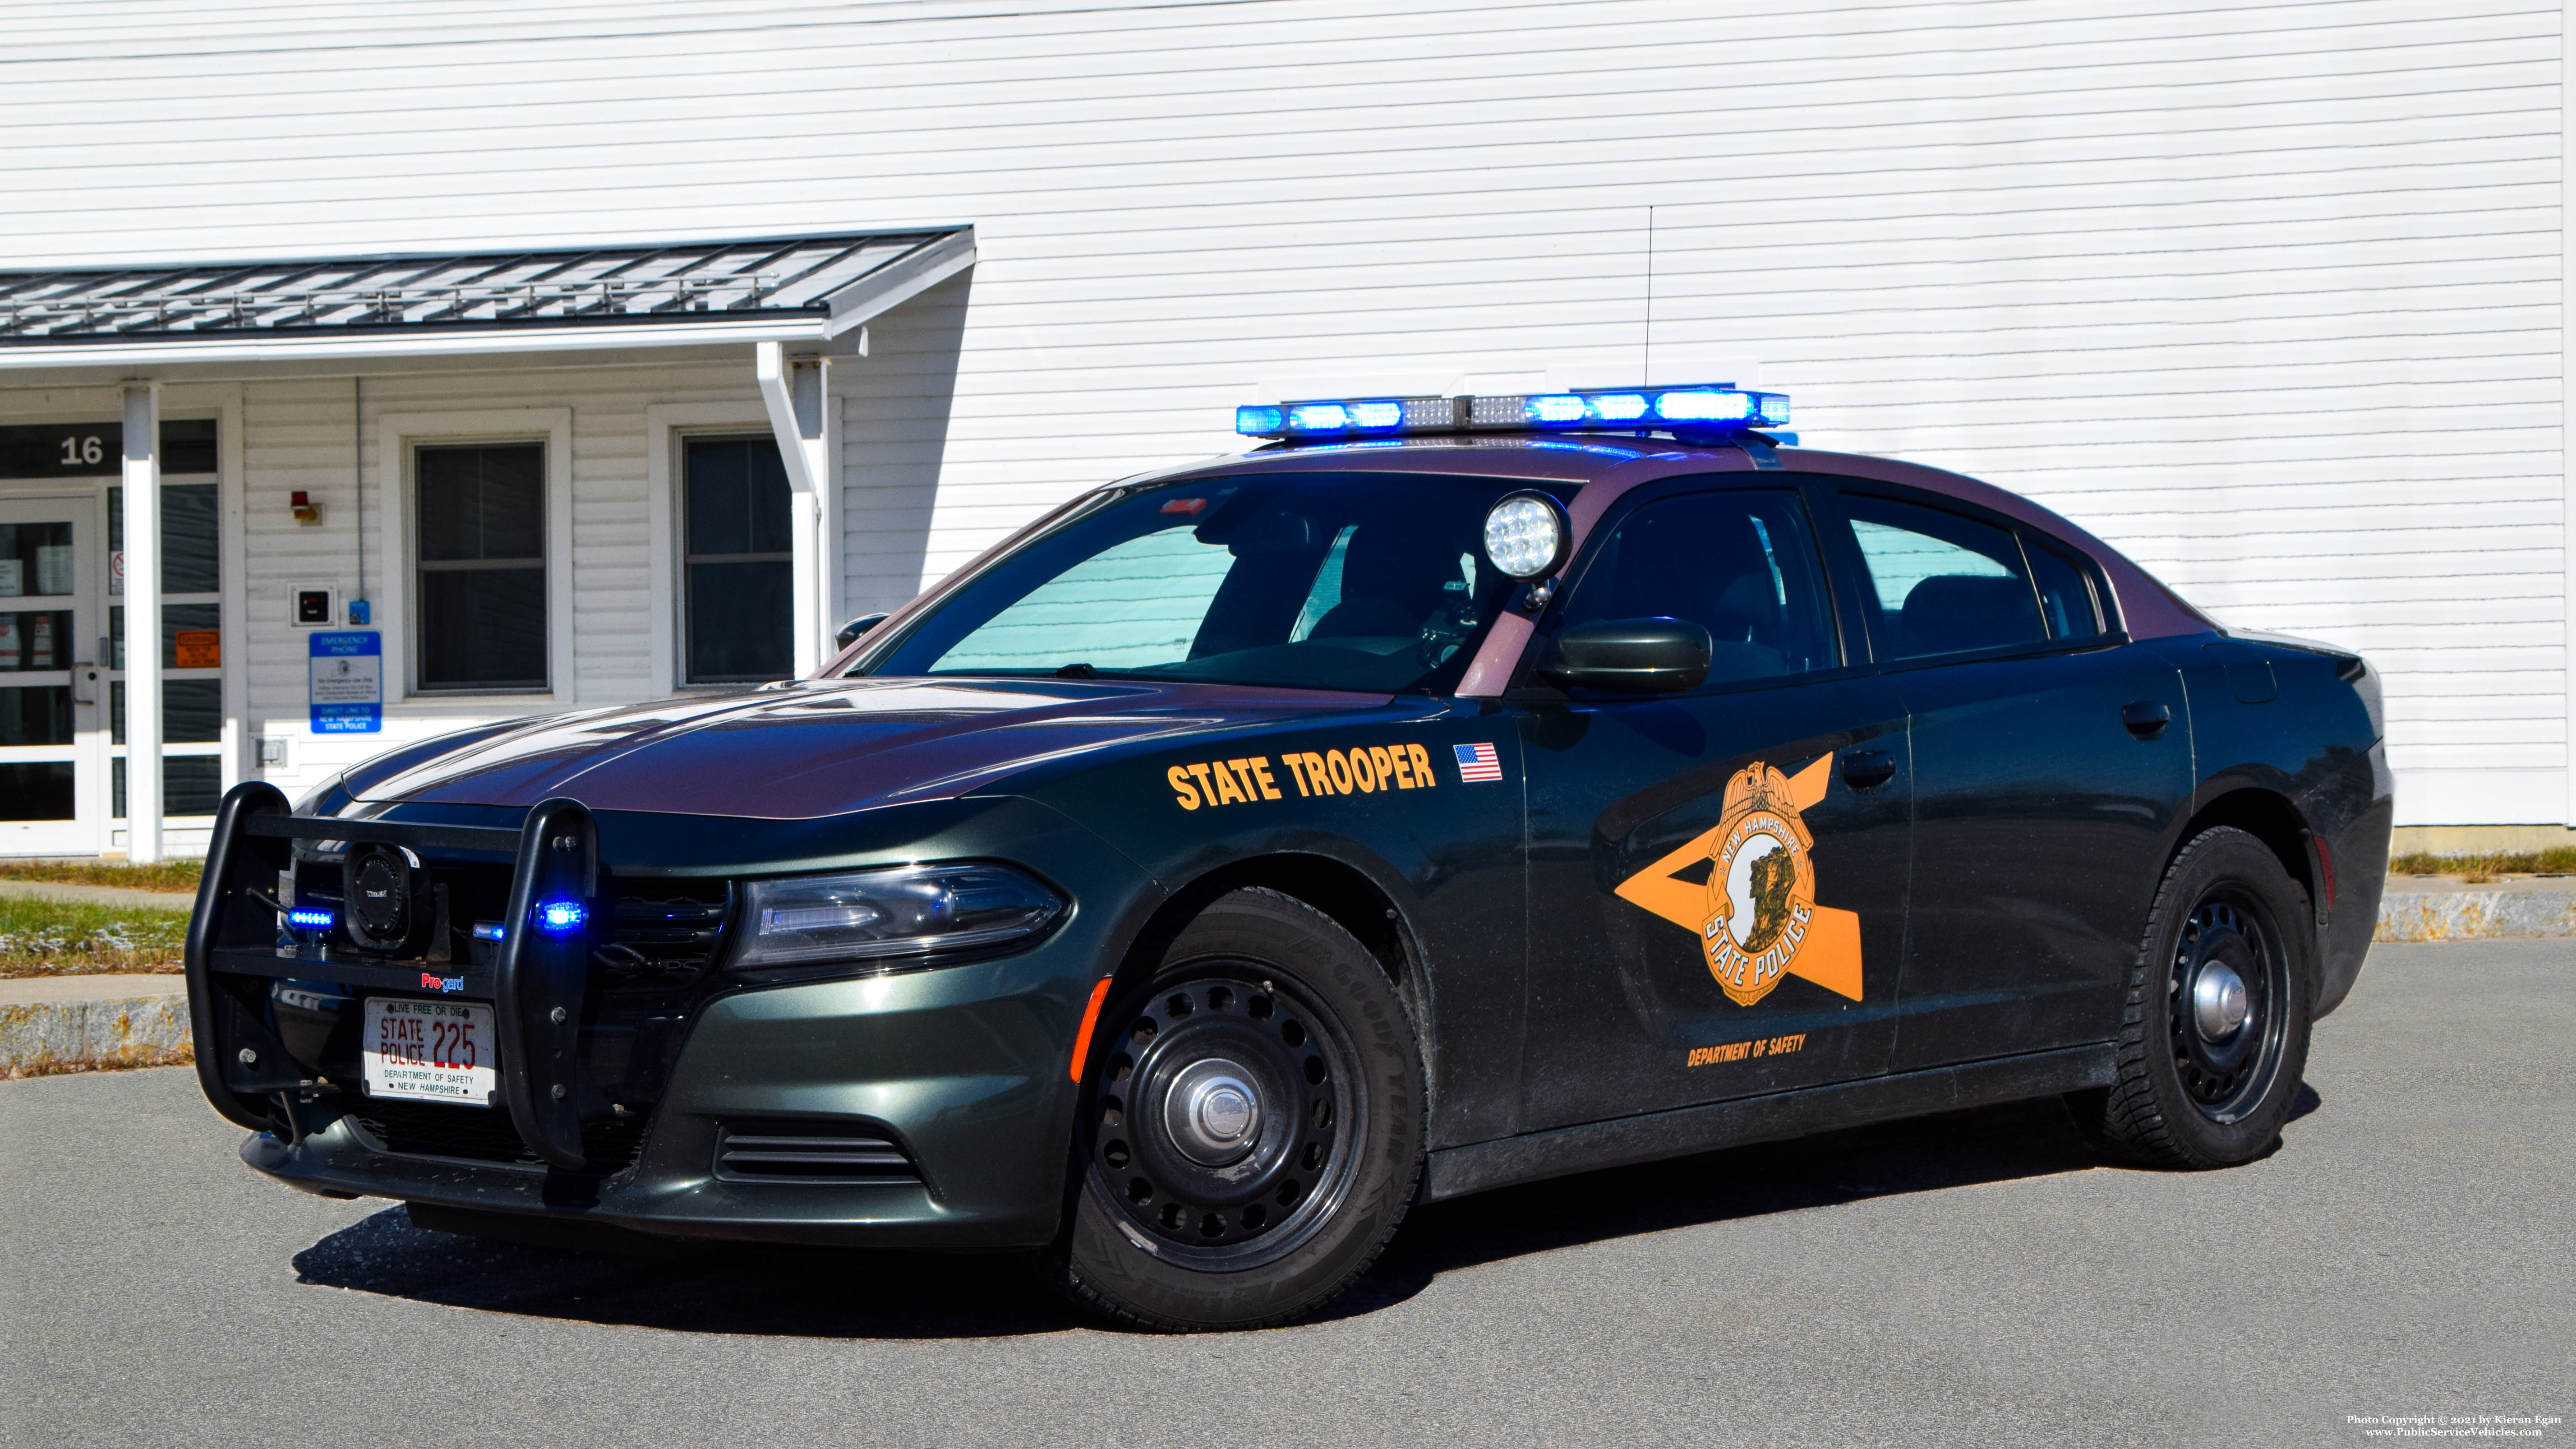 A photo  of New Hampshire State Police
            Cruiser 225, a 2015-2019 Dodge Charger             taken by Kieran Egan